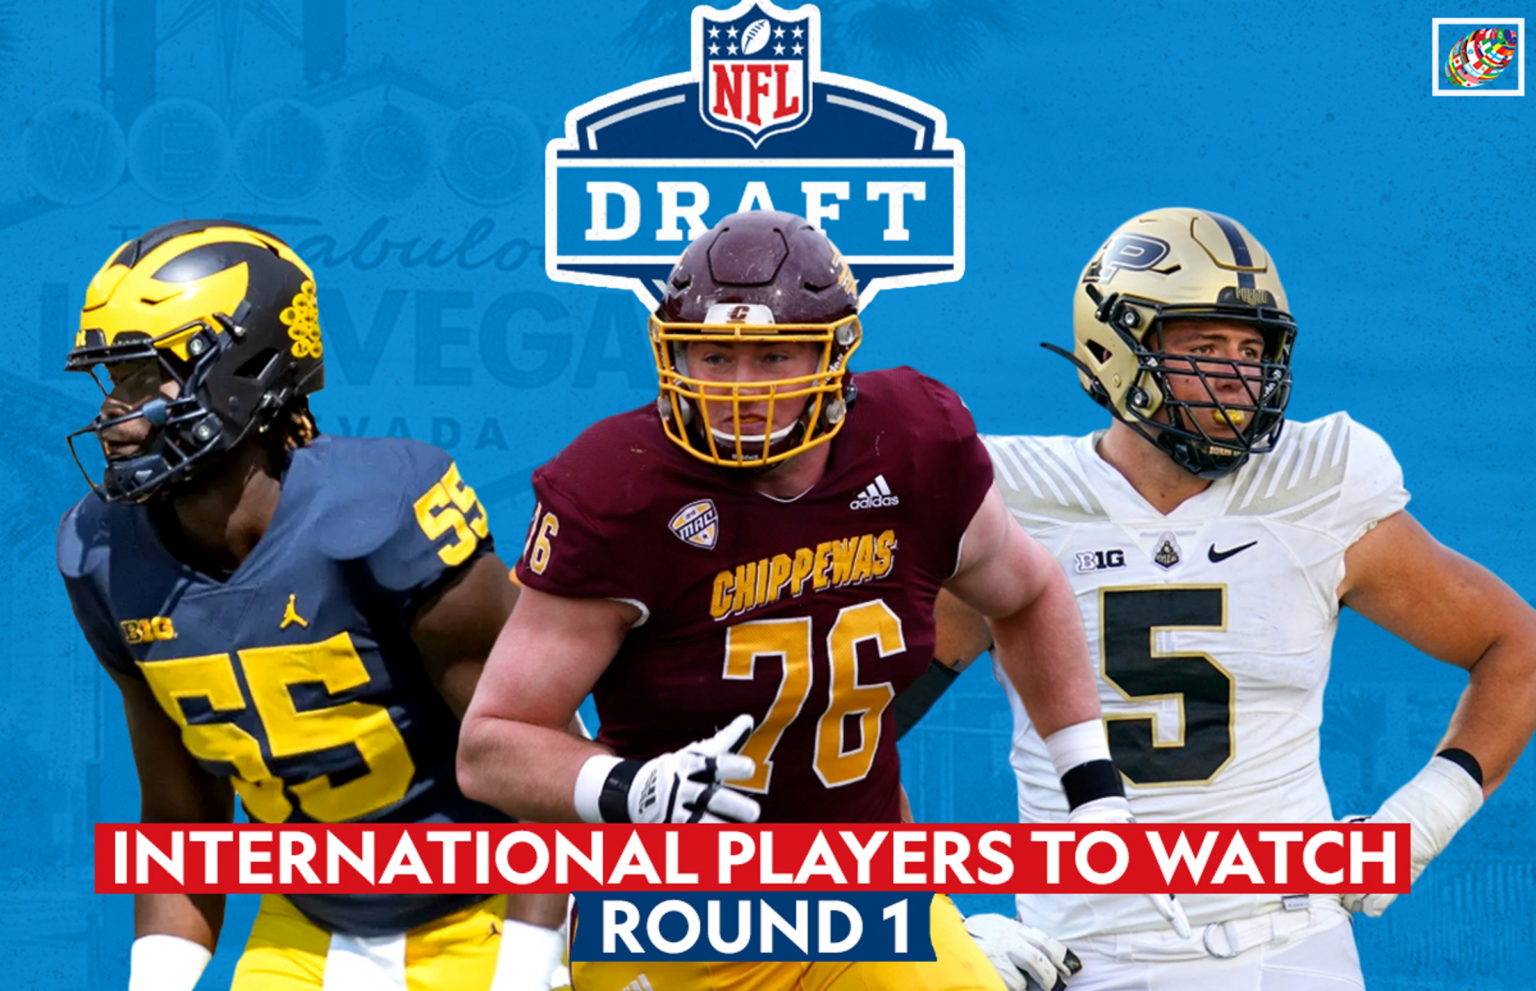 NFL Draft 2022 Best international players to watch in historic Round 1